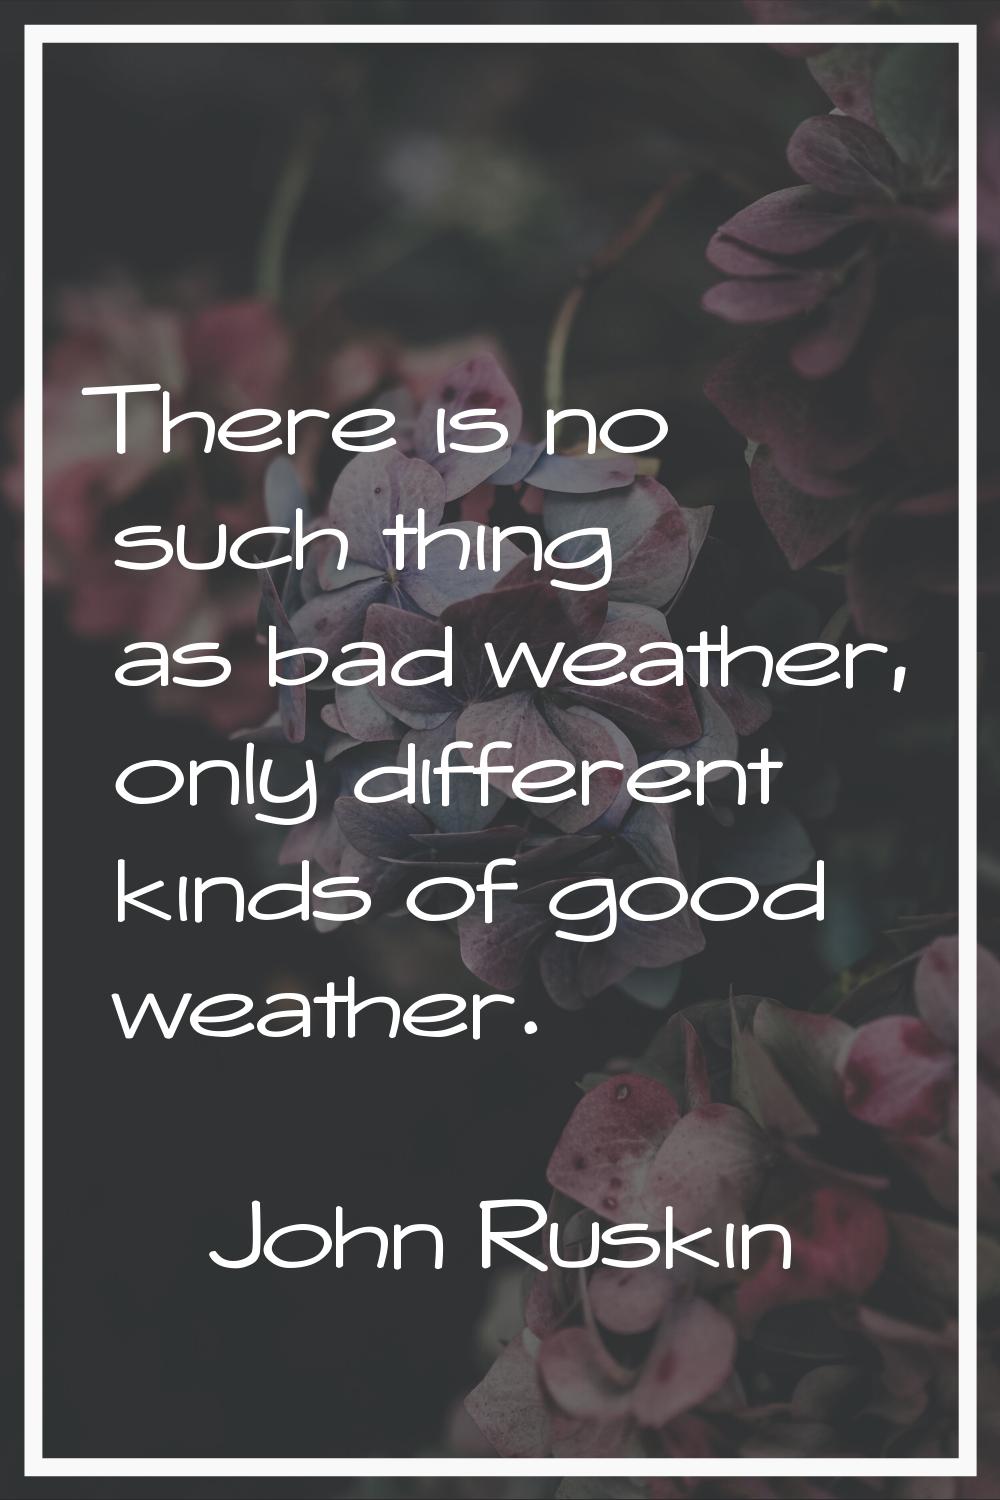 There is no such thing as bad weather, only different kinds of good weather.